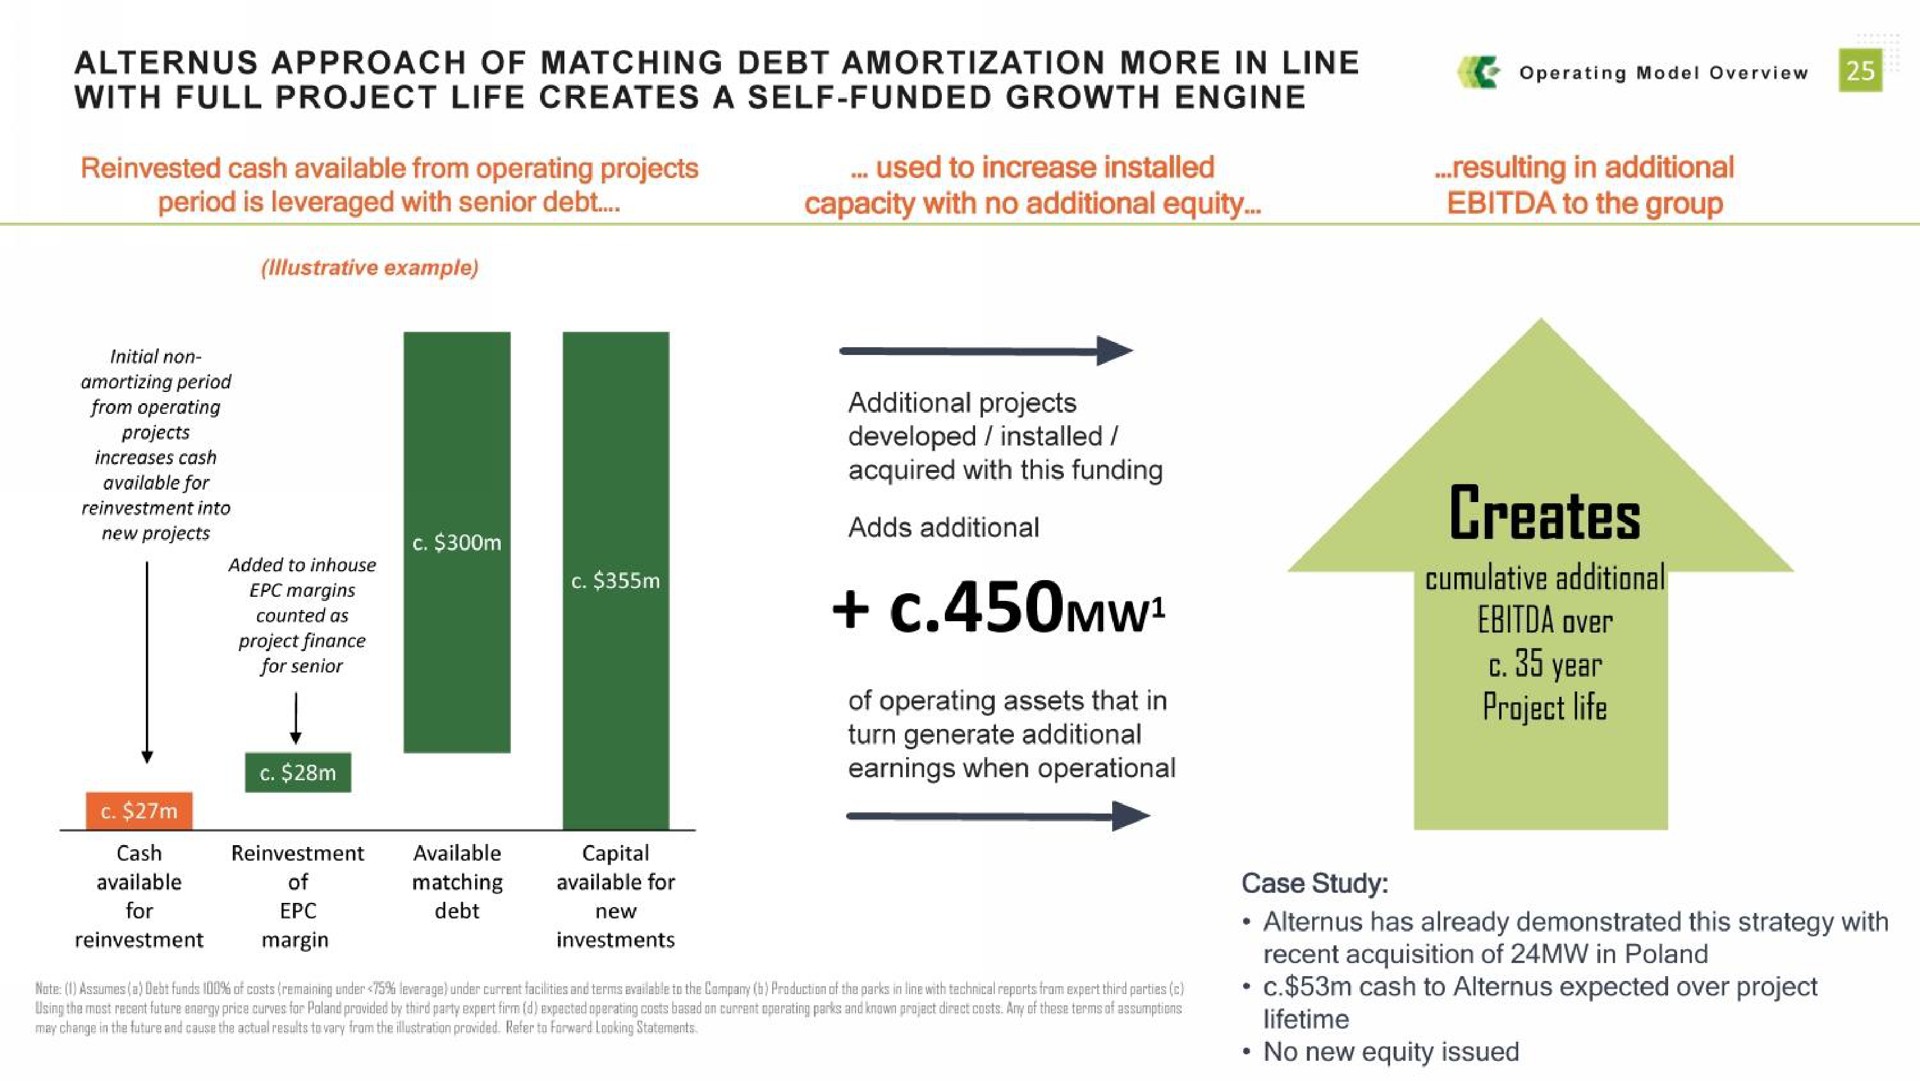 approach of matching debt amortization more in line with full project life creates a self funded growth engine creates cumulative additional over do year project life | Alternus Energy